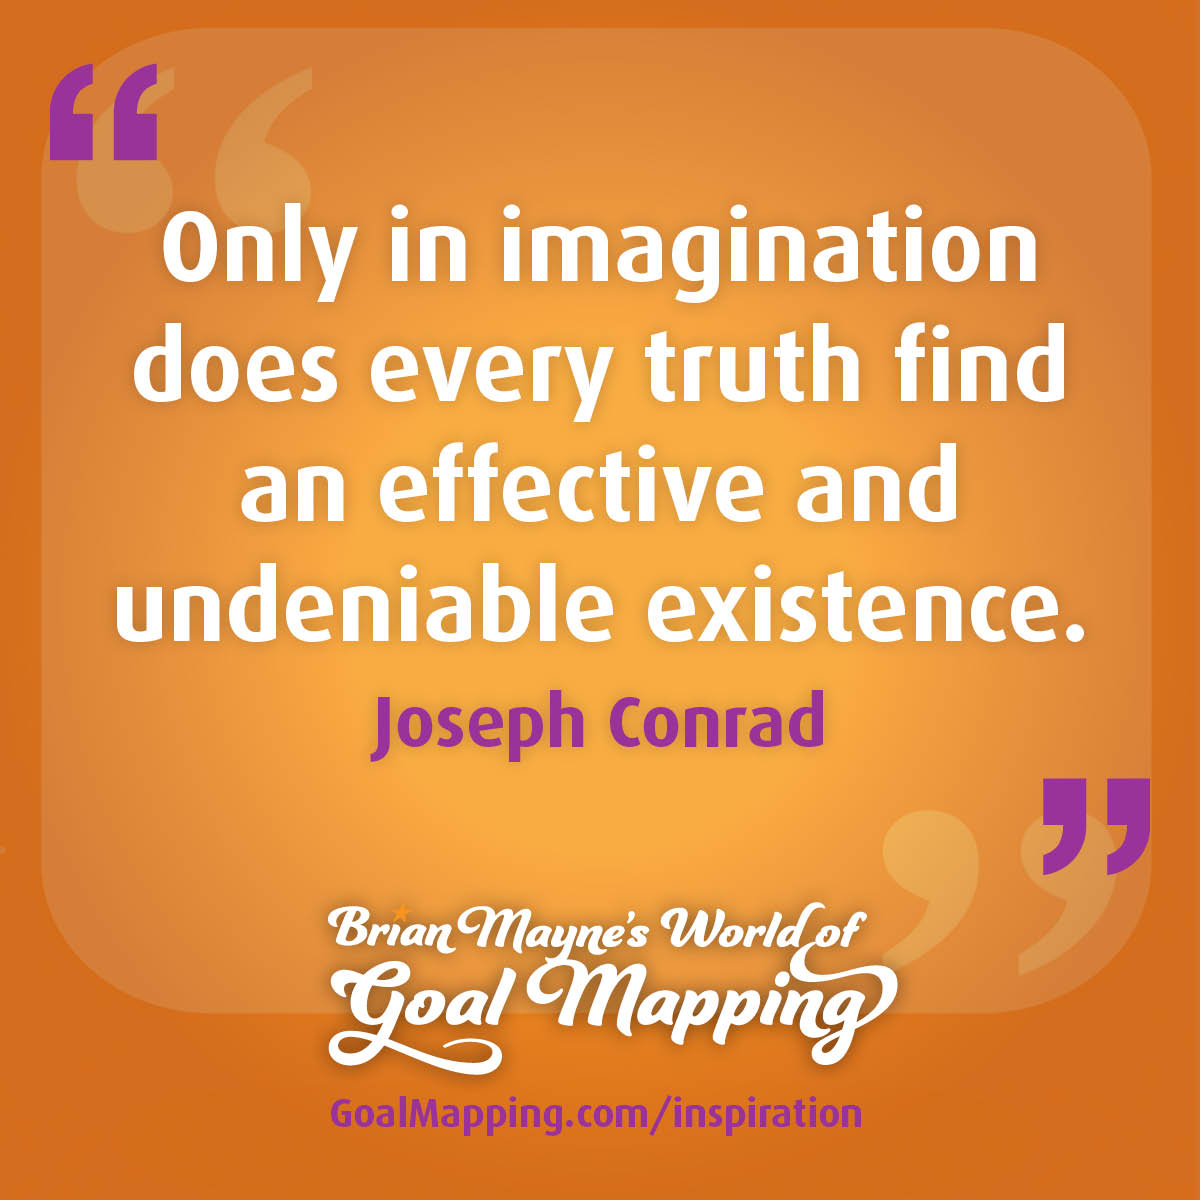 "Only in imagination does every truth find an effective and undeniable existence." Joseph Conrad